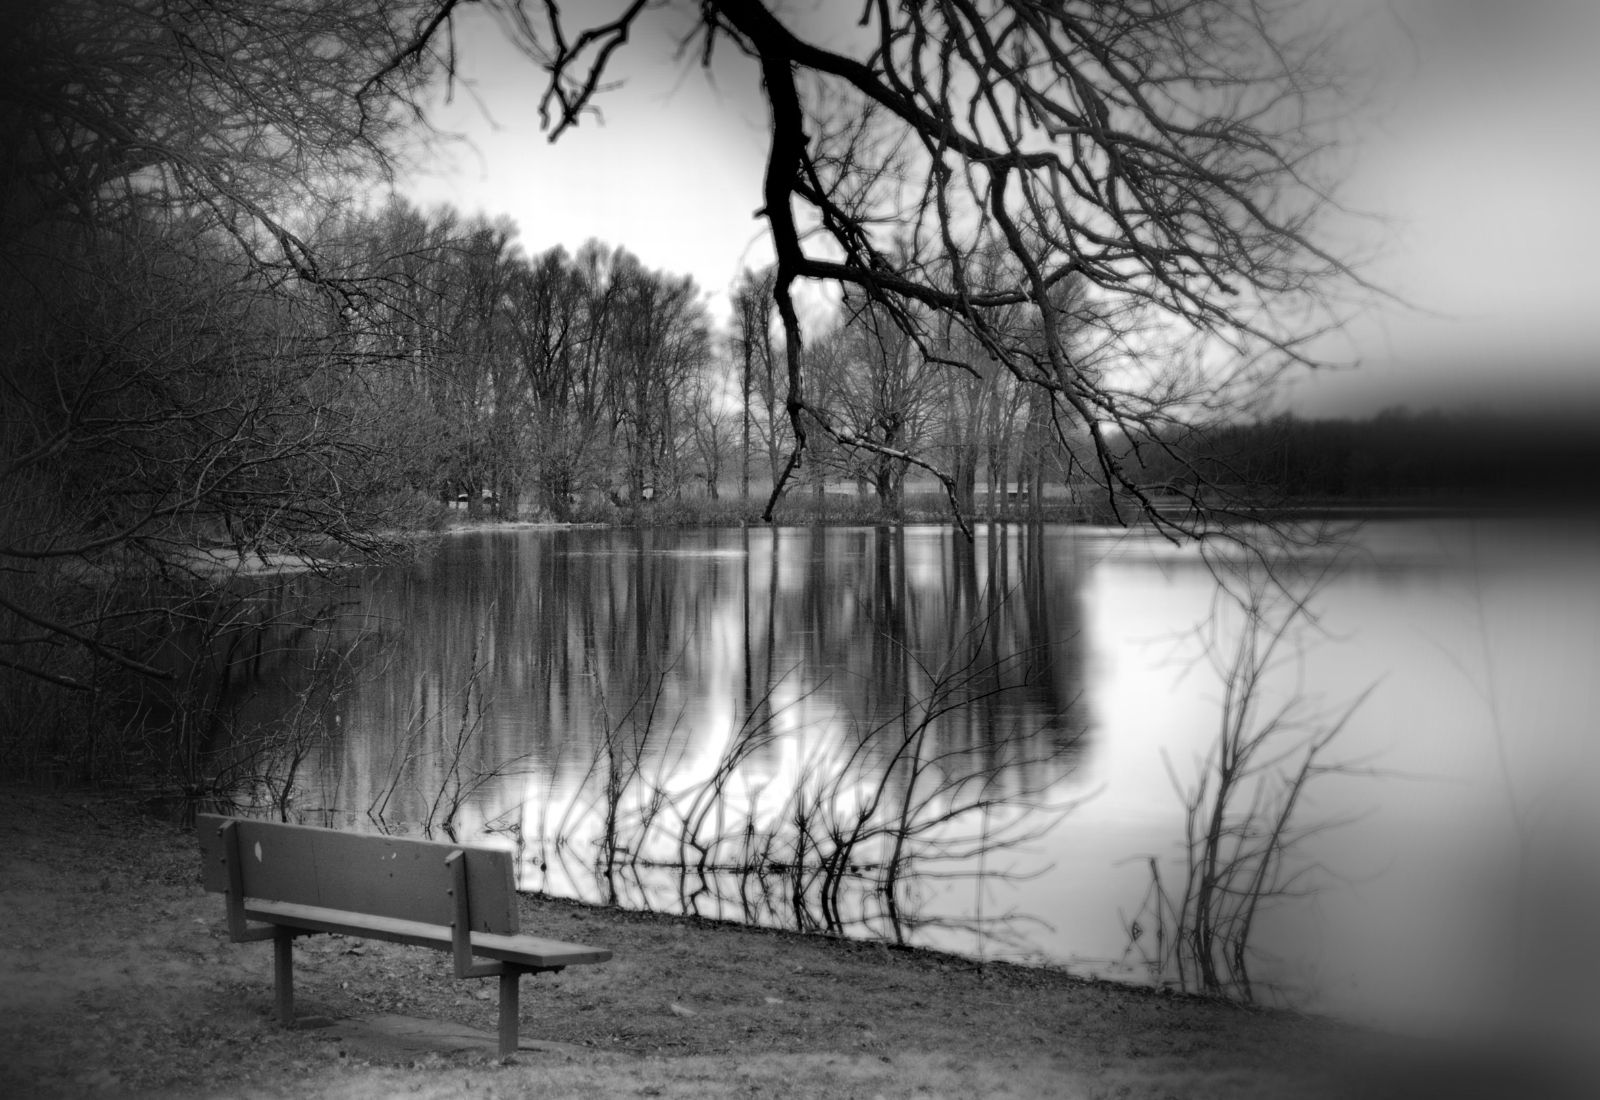 a bench sits empty near the edge of the water, reflections of trees in the distance